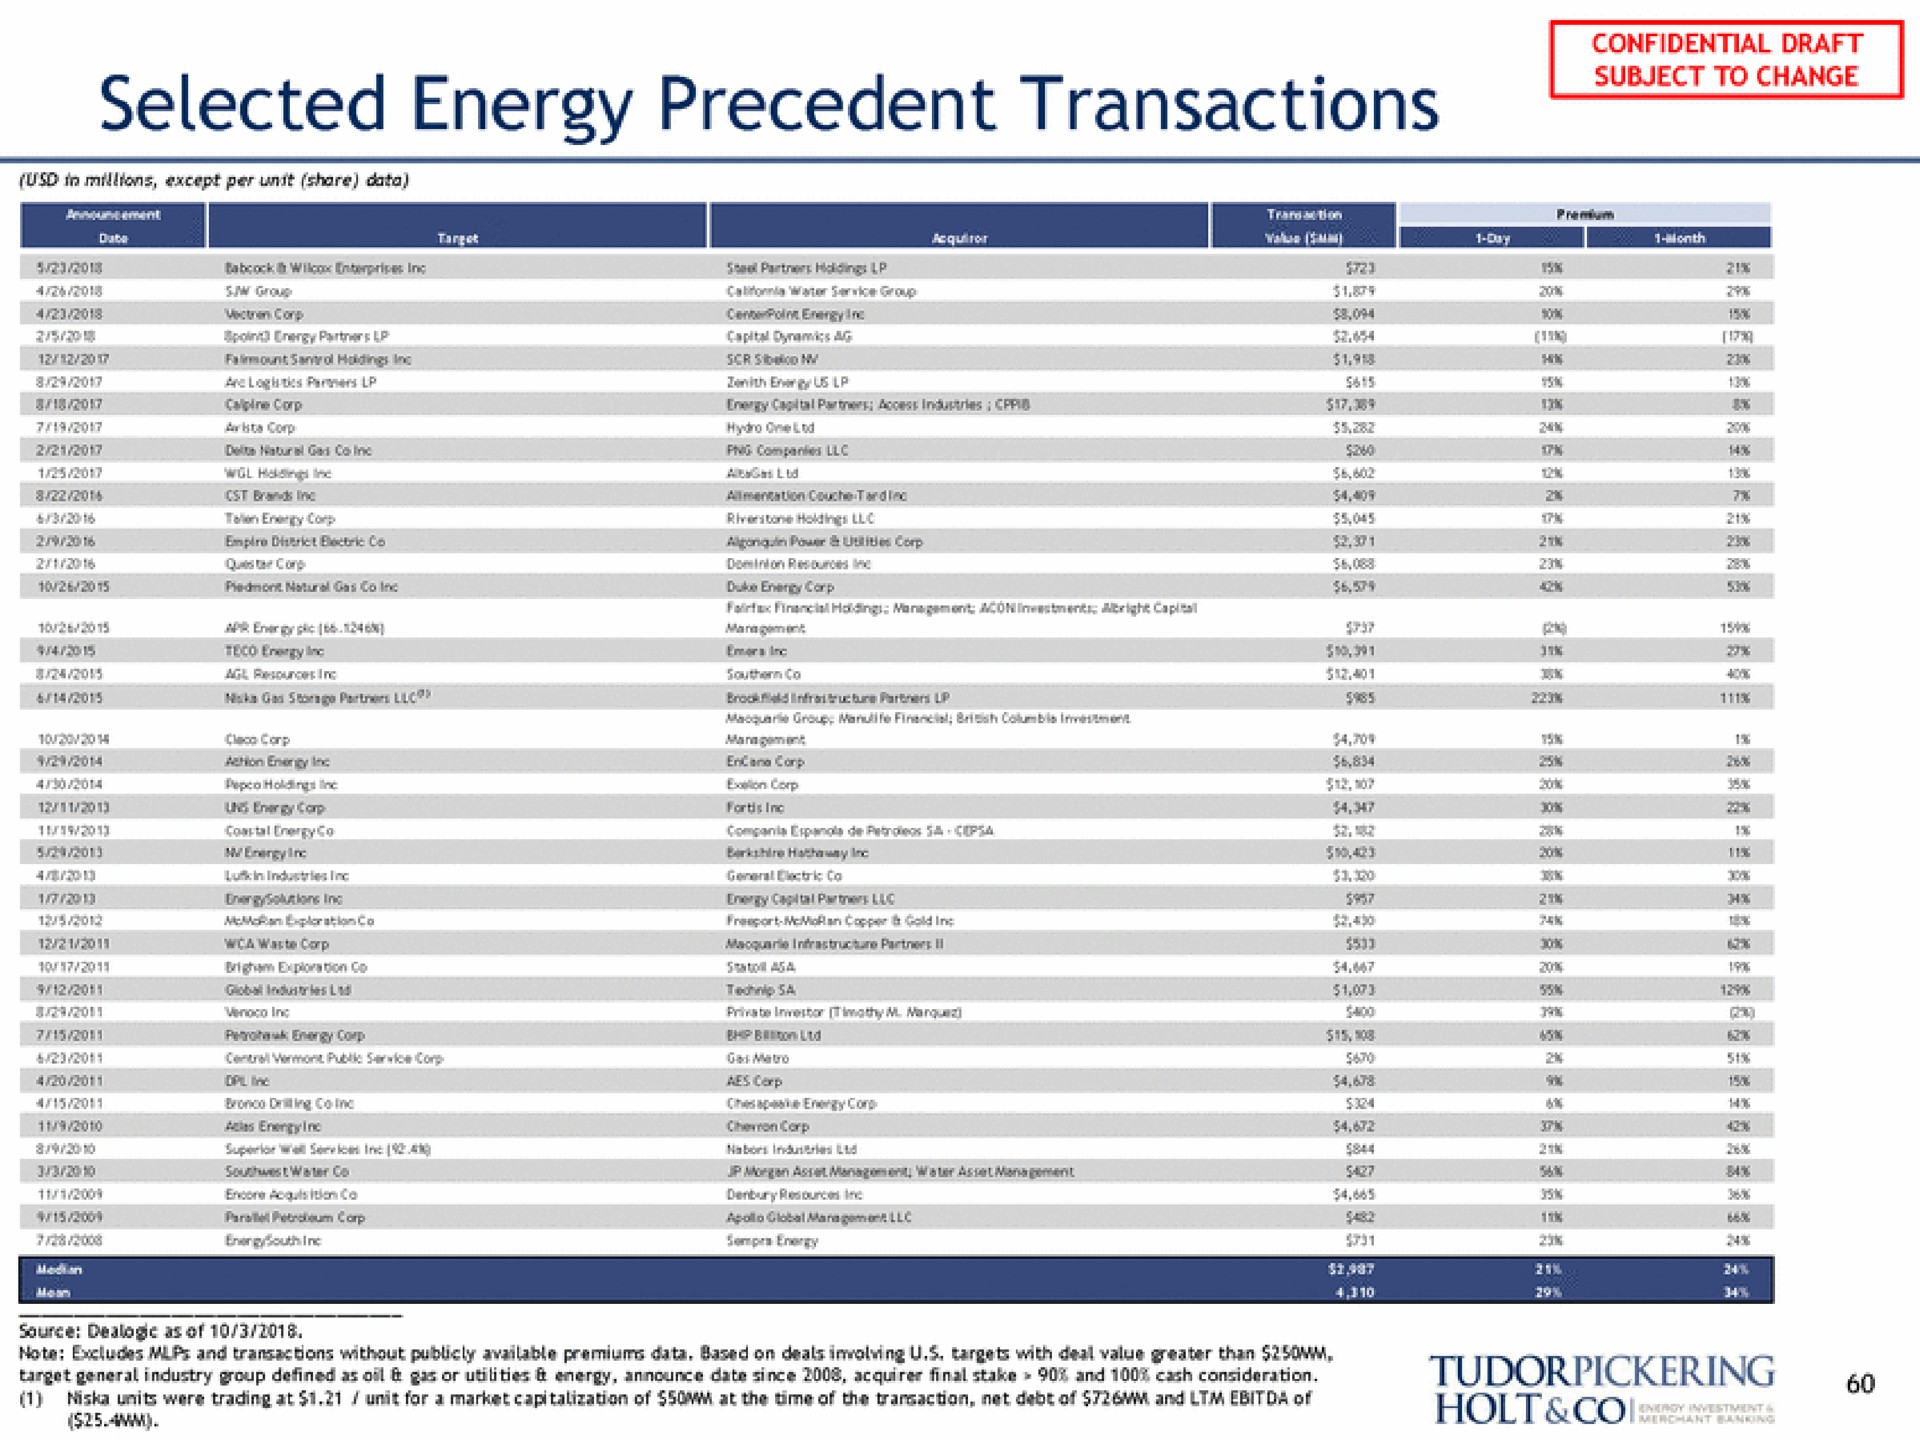 selected energy precedent transactions subject to change holt | Tudor, Pickering, Holt & Co